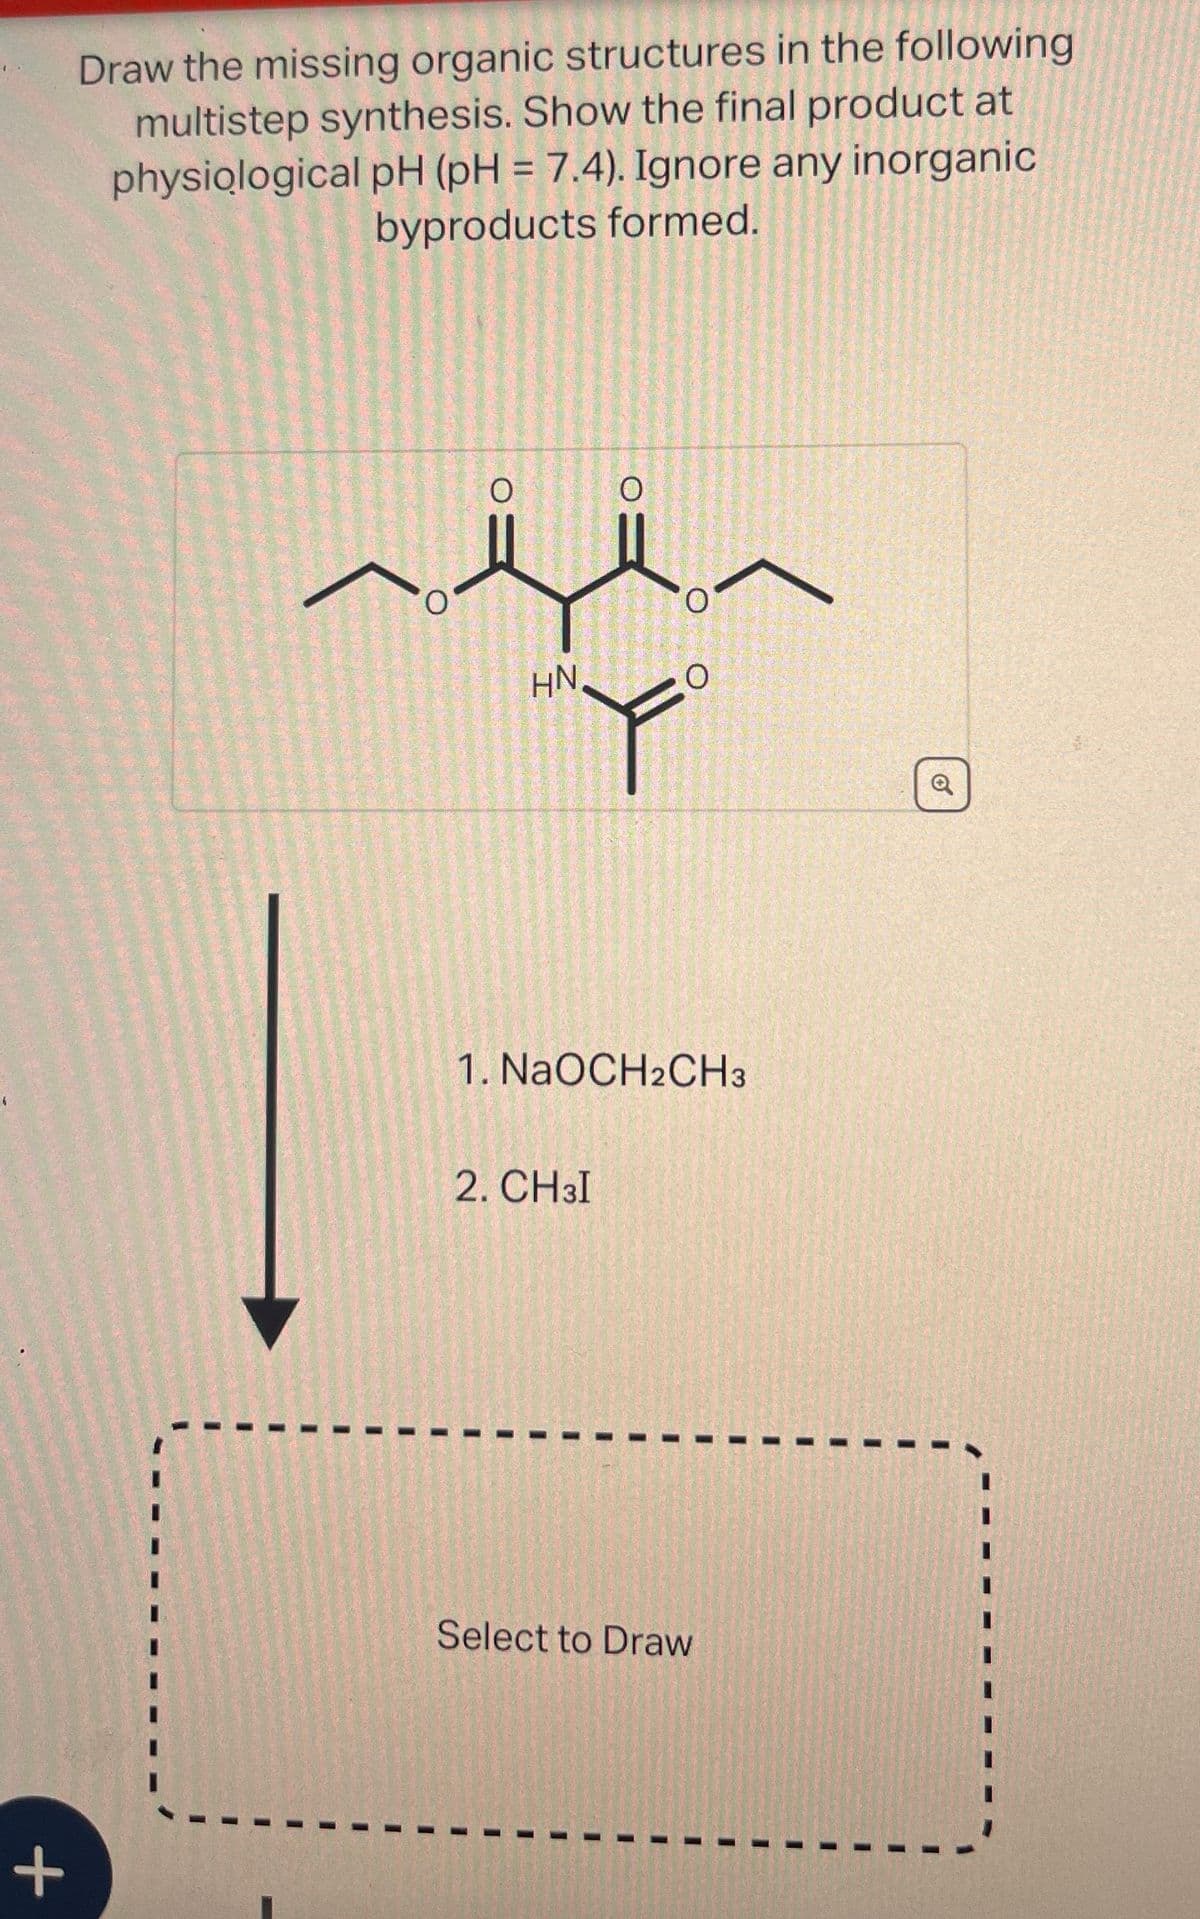 Draw the missing organic structures in the following
multistep synthesis. Show the final product at
physiological pH (pH = 7.4). Ignore any inorganic
byproducts formed.
+
0
O
HN
1. NaOCH2CH3
2. CH3I
Select to Draw